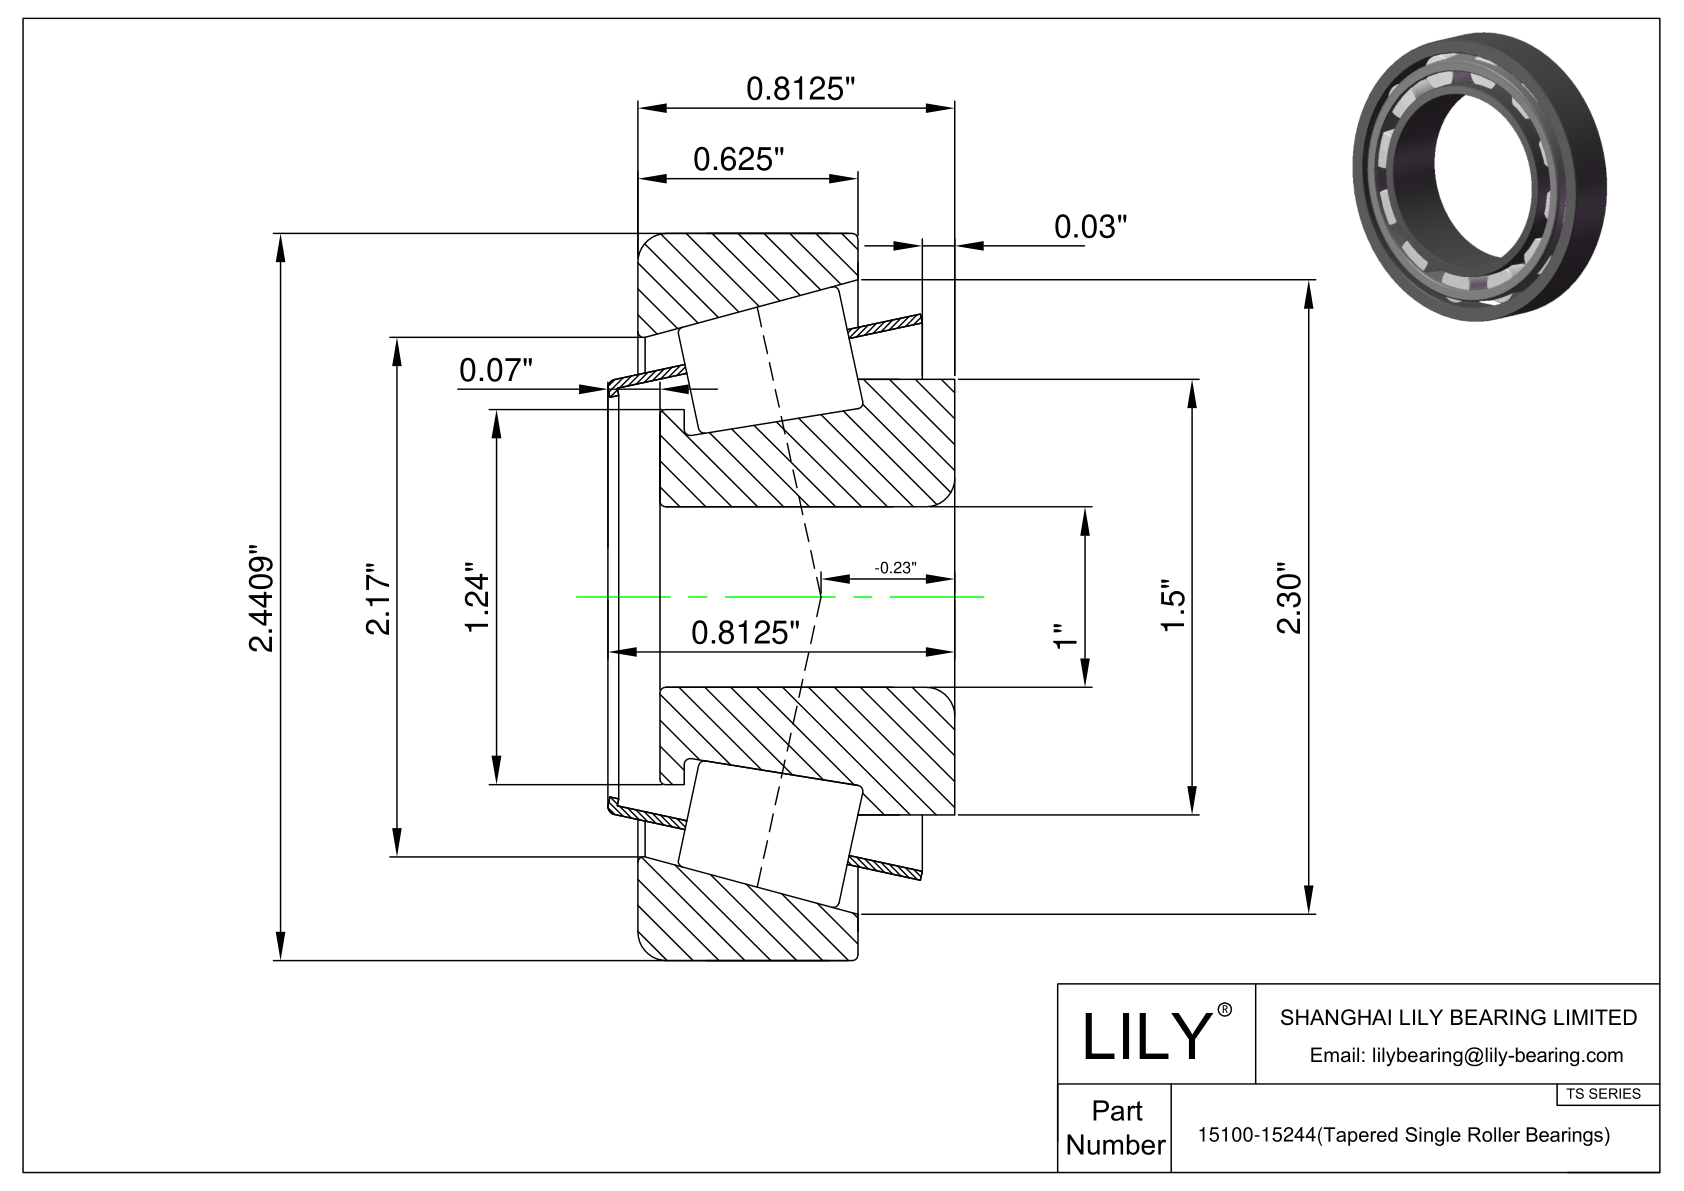 15100-15244 TS (Tapered Single Roller Bearings) (Imperial) cad drawing